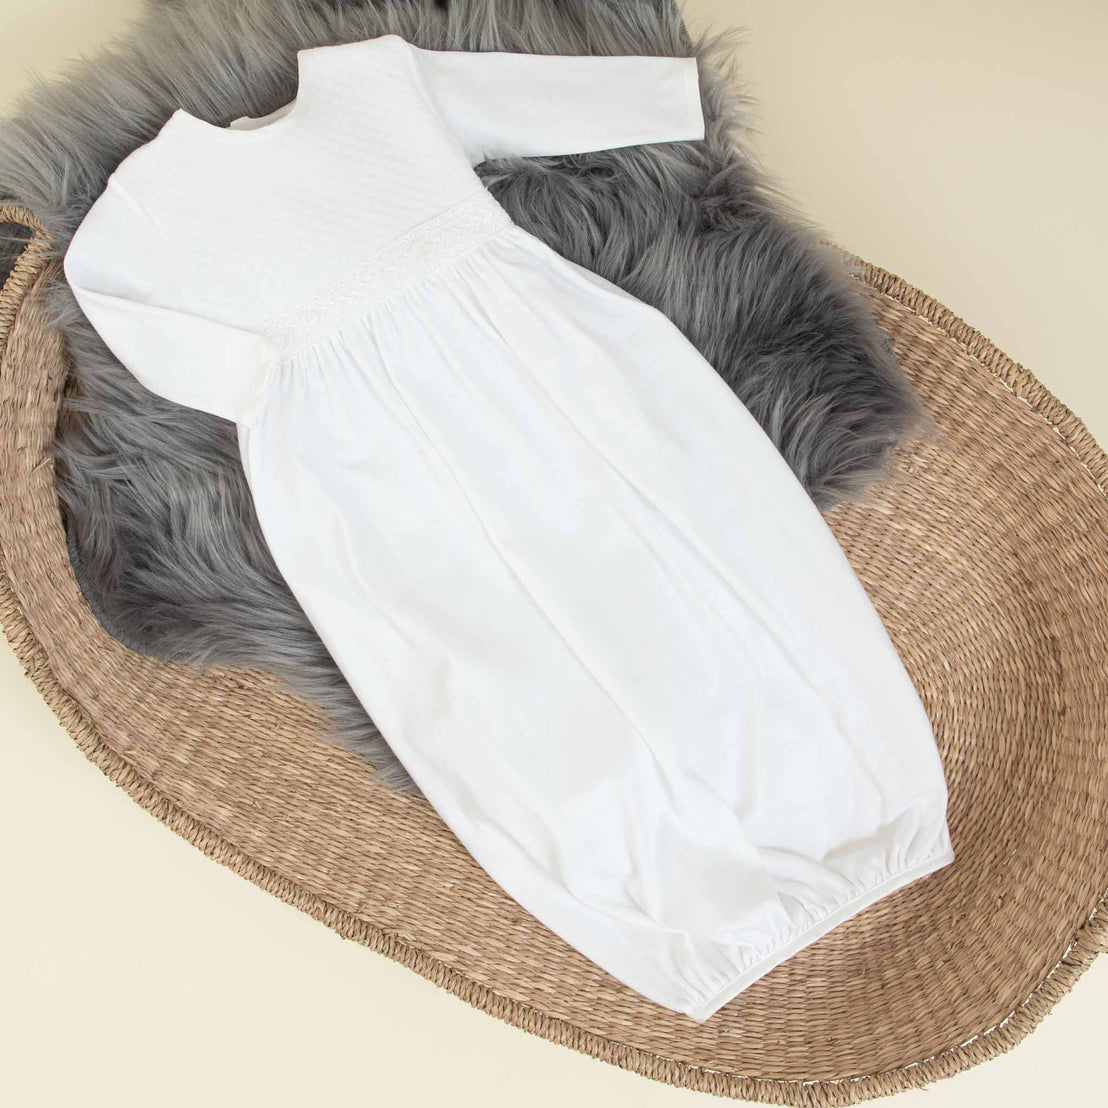 Flat lay photo the Elijah Newborn Gown in a cradle with a grey fur blanket